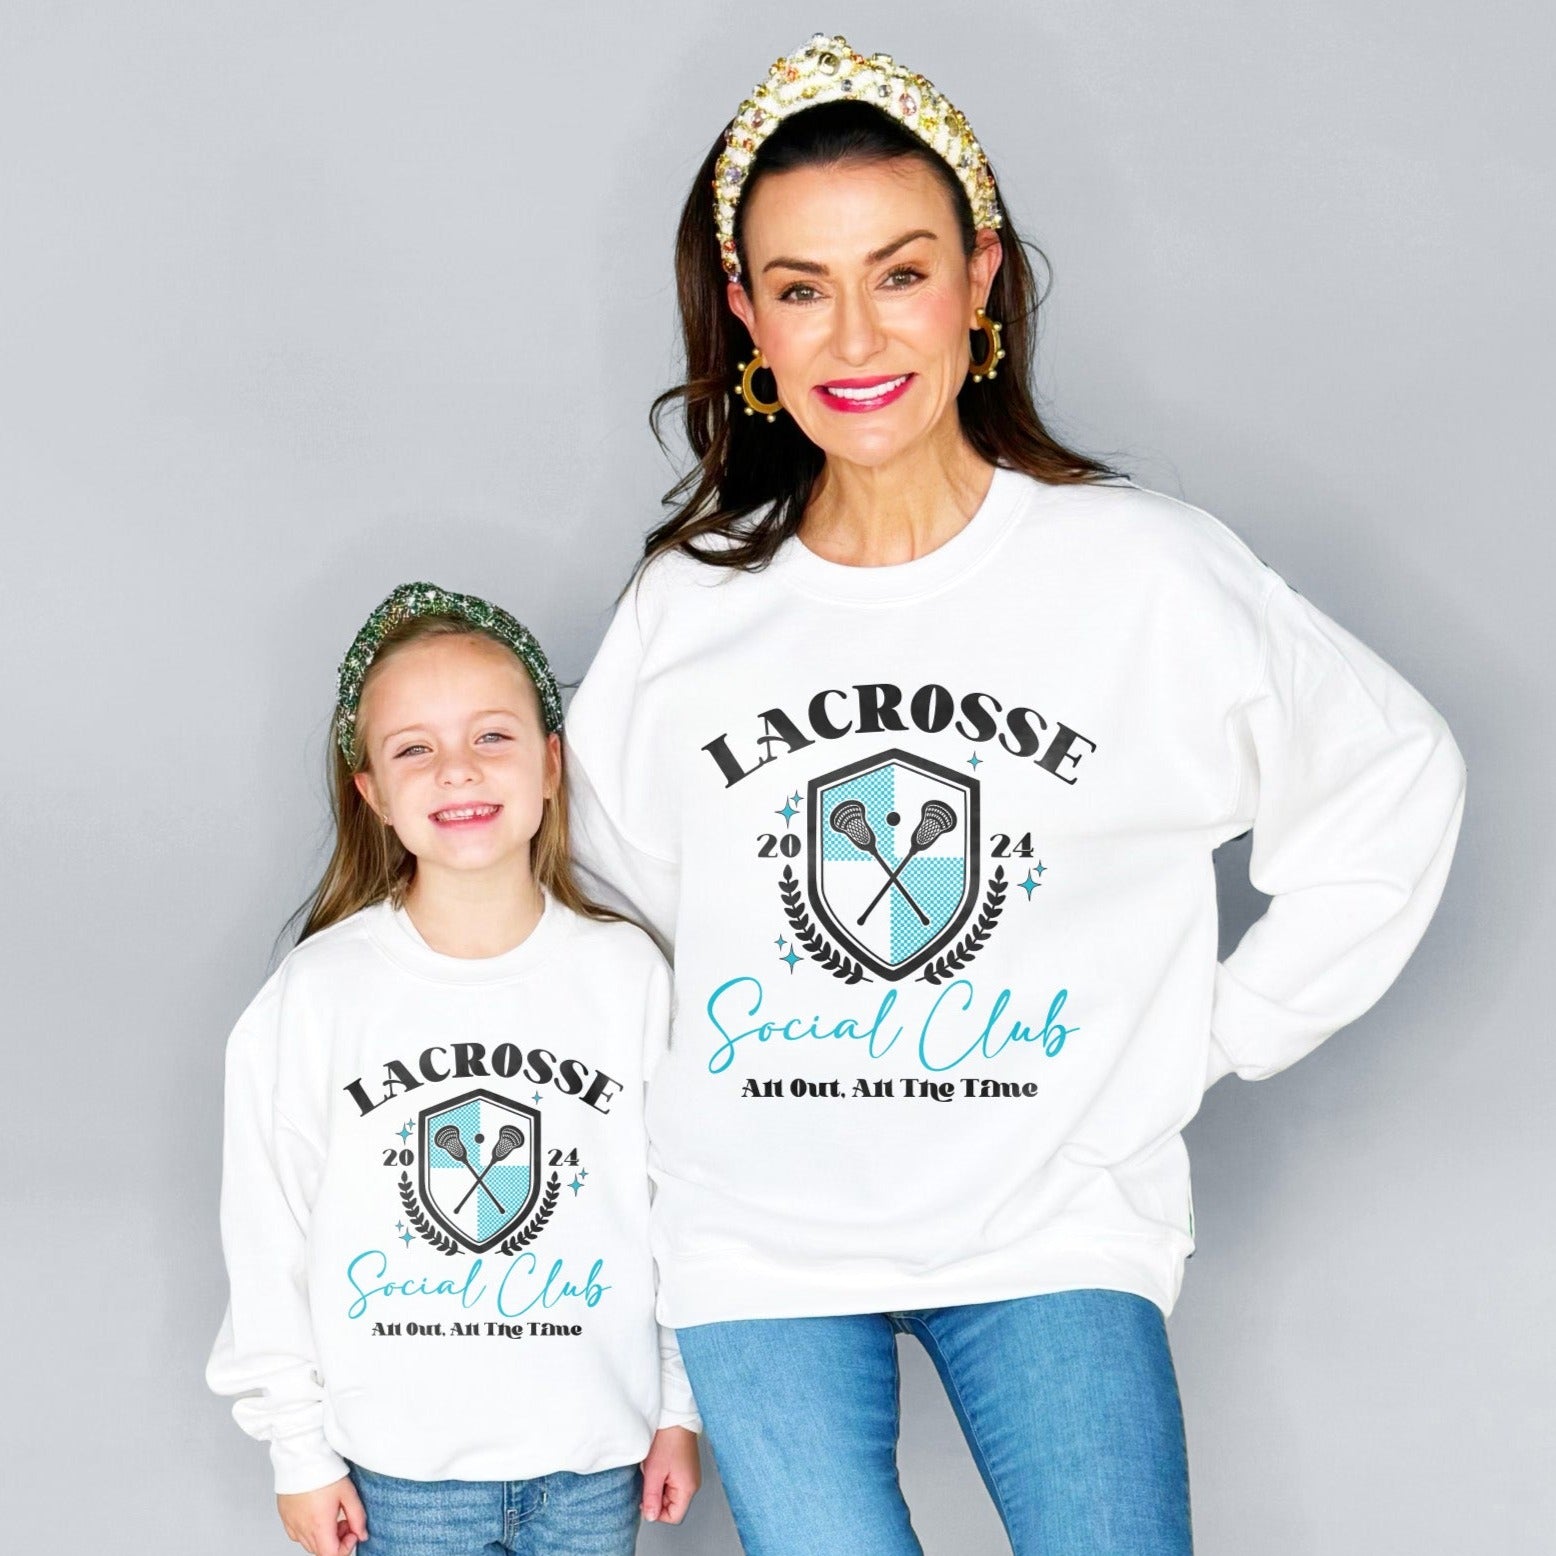 Lacrosse Social Club Youth and Adult Sweatshirt